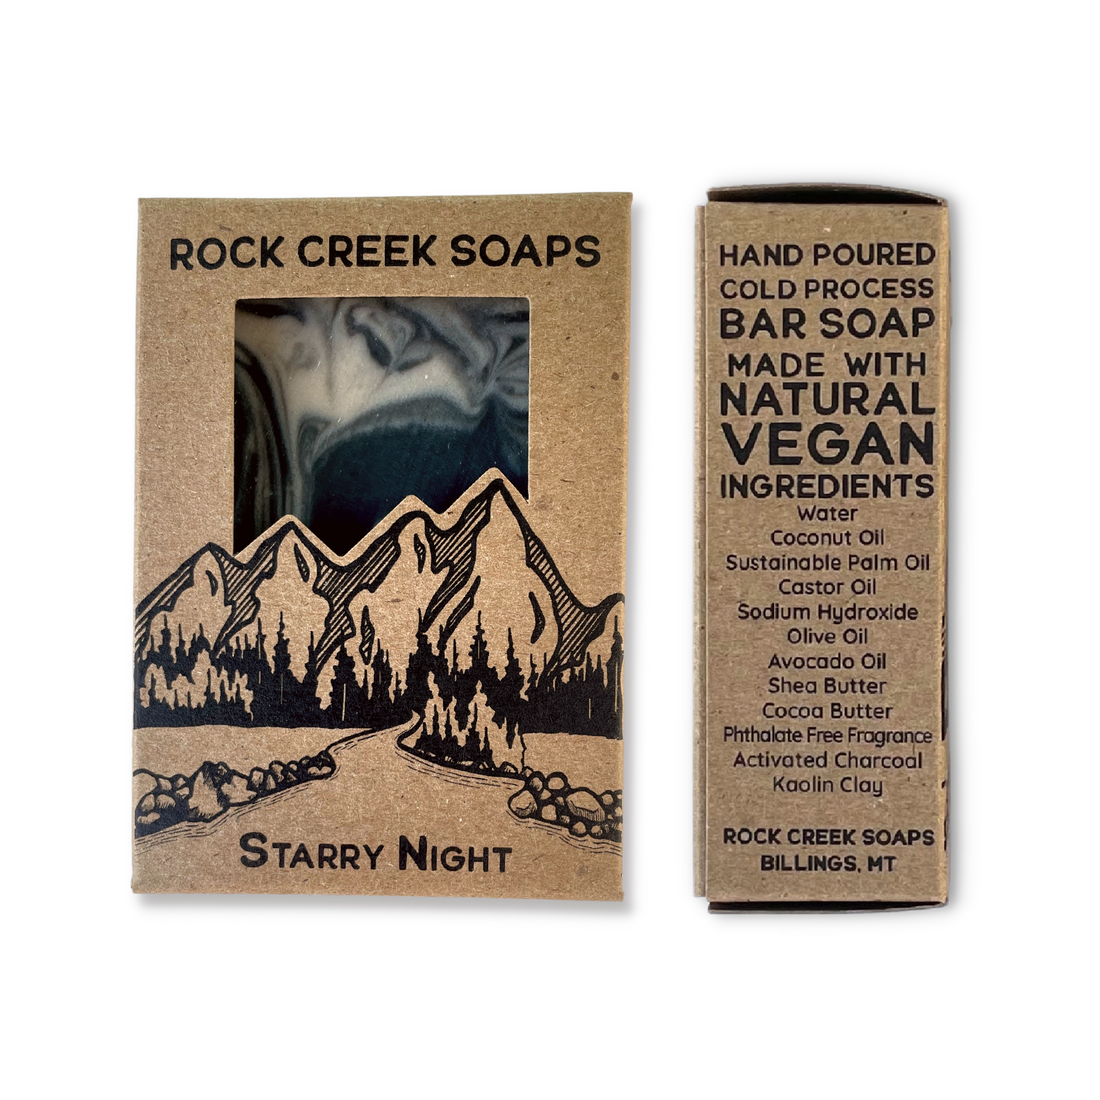 Rock Creek Soaps Starry Sky Scent In Plastic Free, Kraft Cardboard Packaging. Front And Side Views, Showing Features And Ingredients.